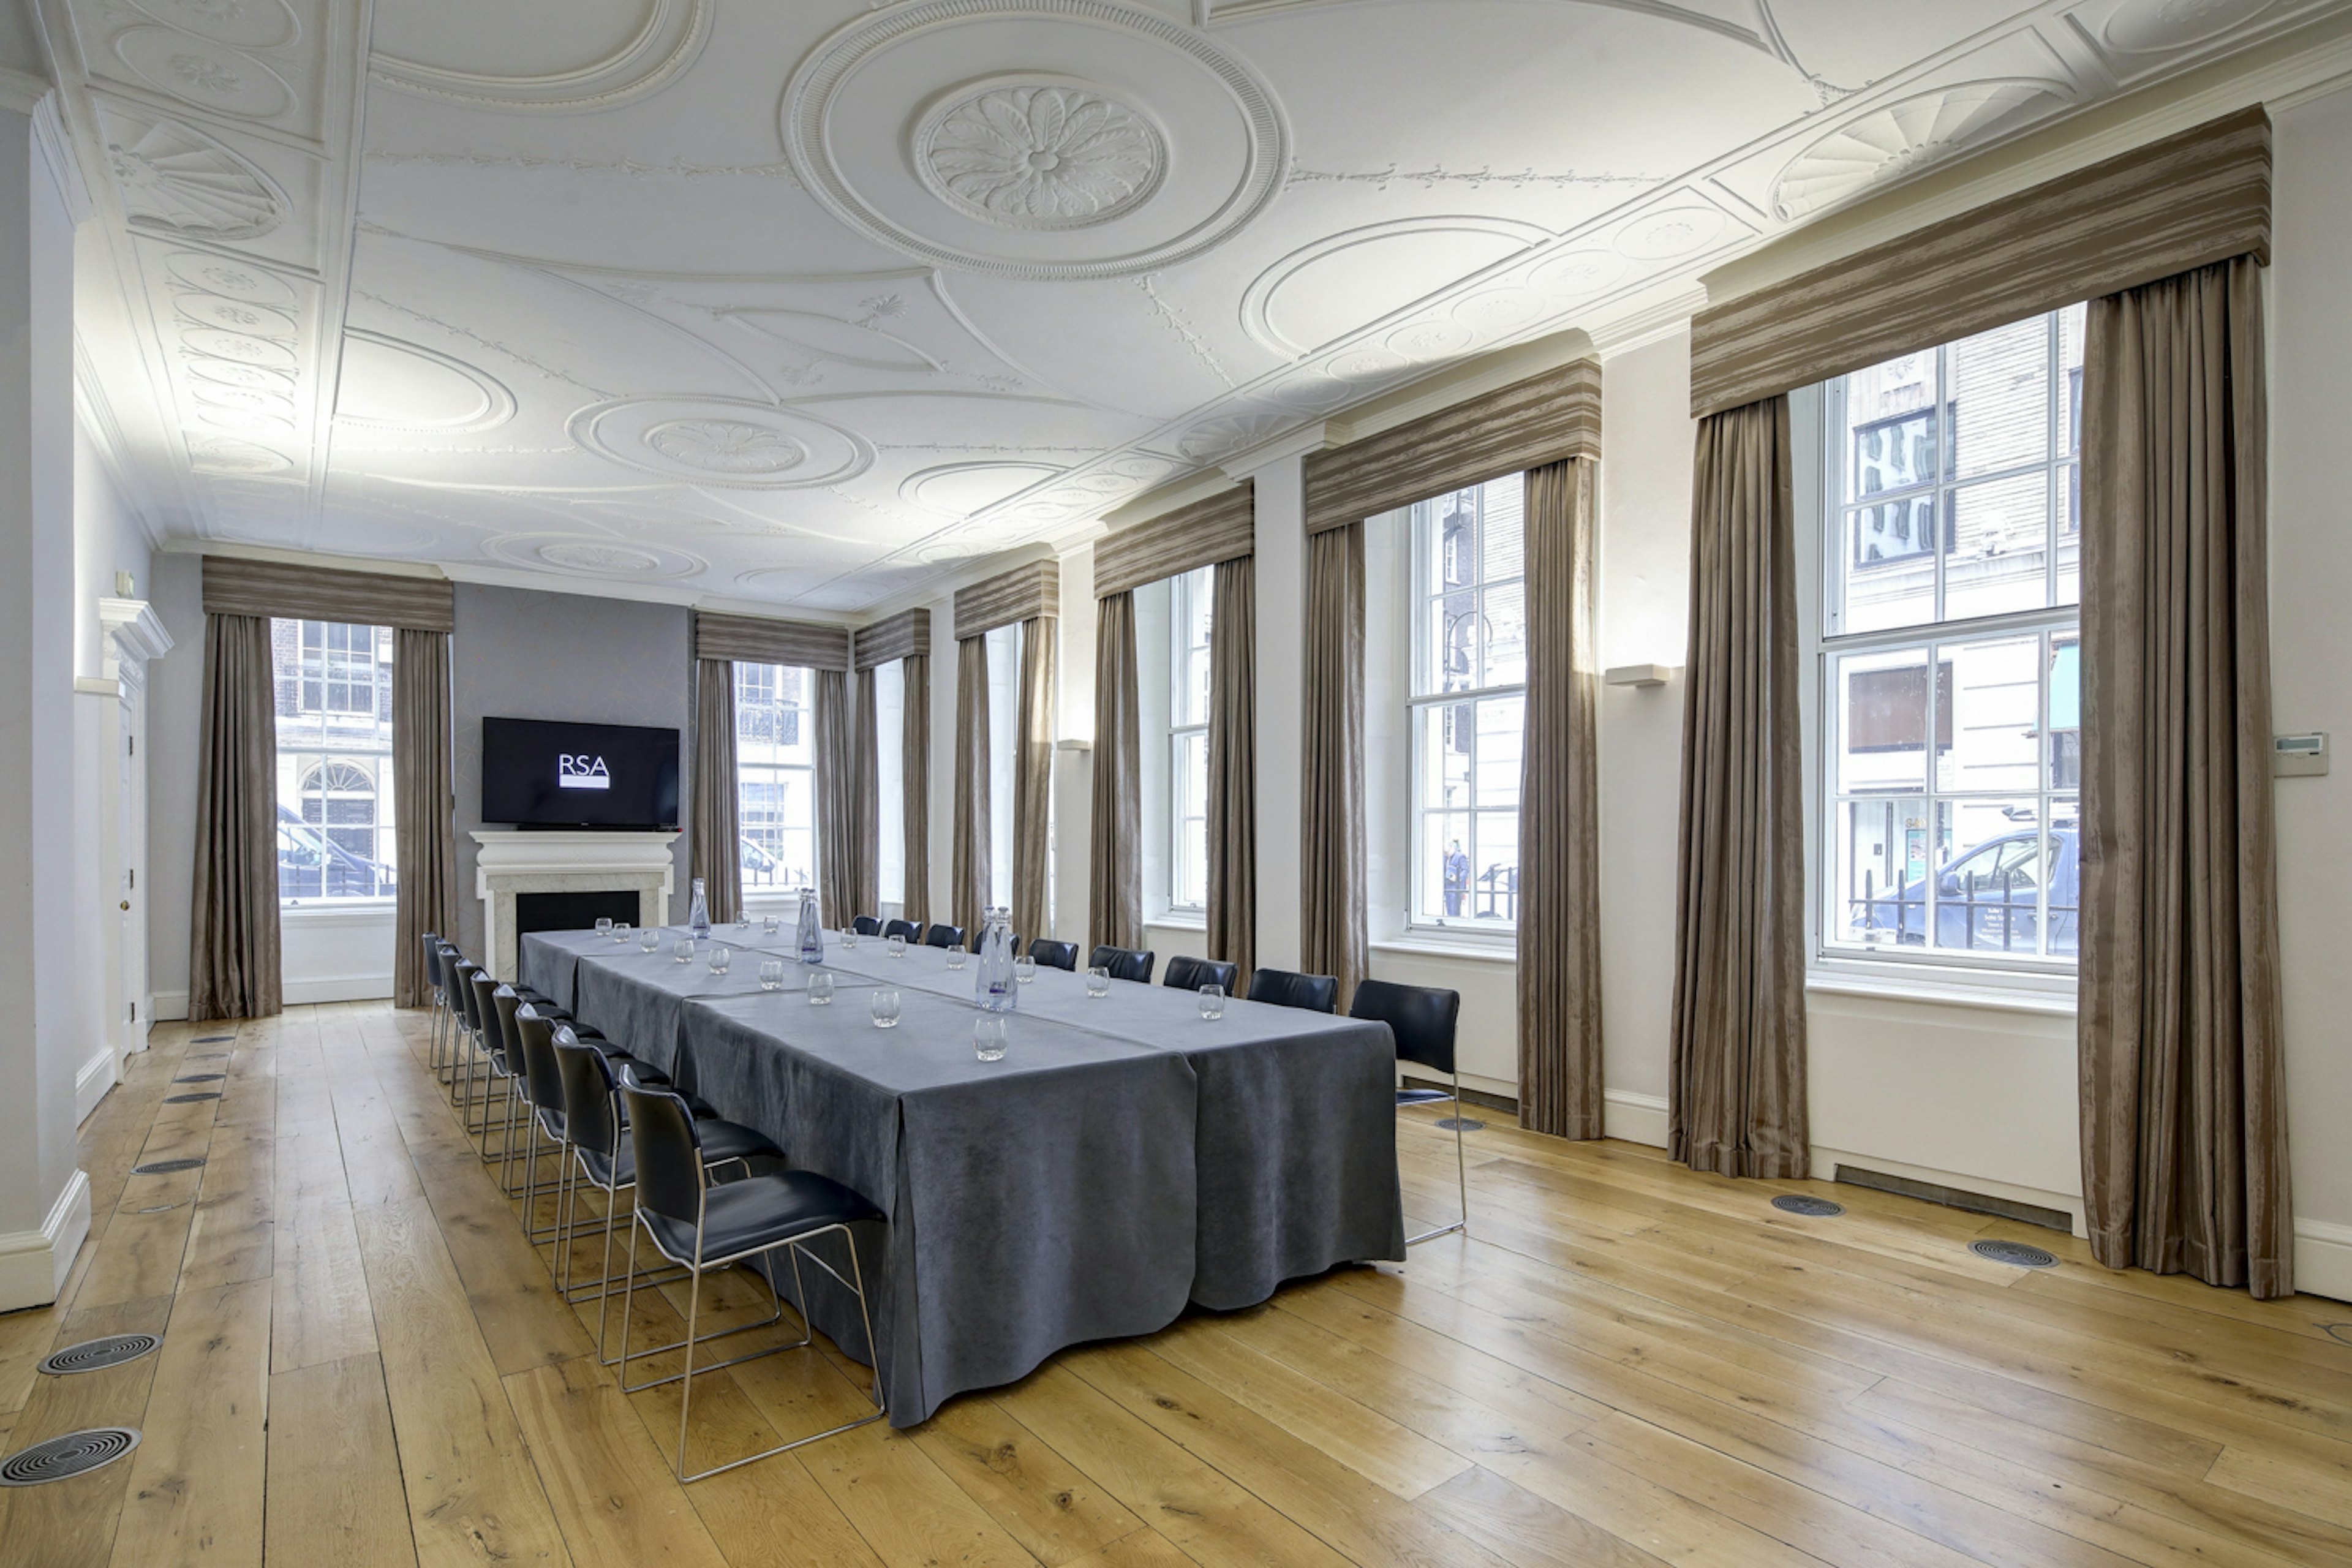 Cheap Conference Venues - RSA House - Business in The Tavern Room - Banner